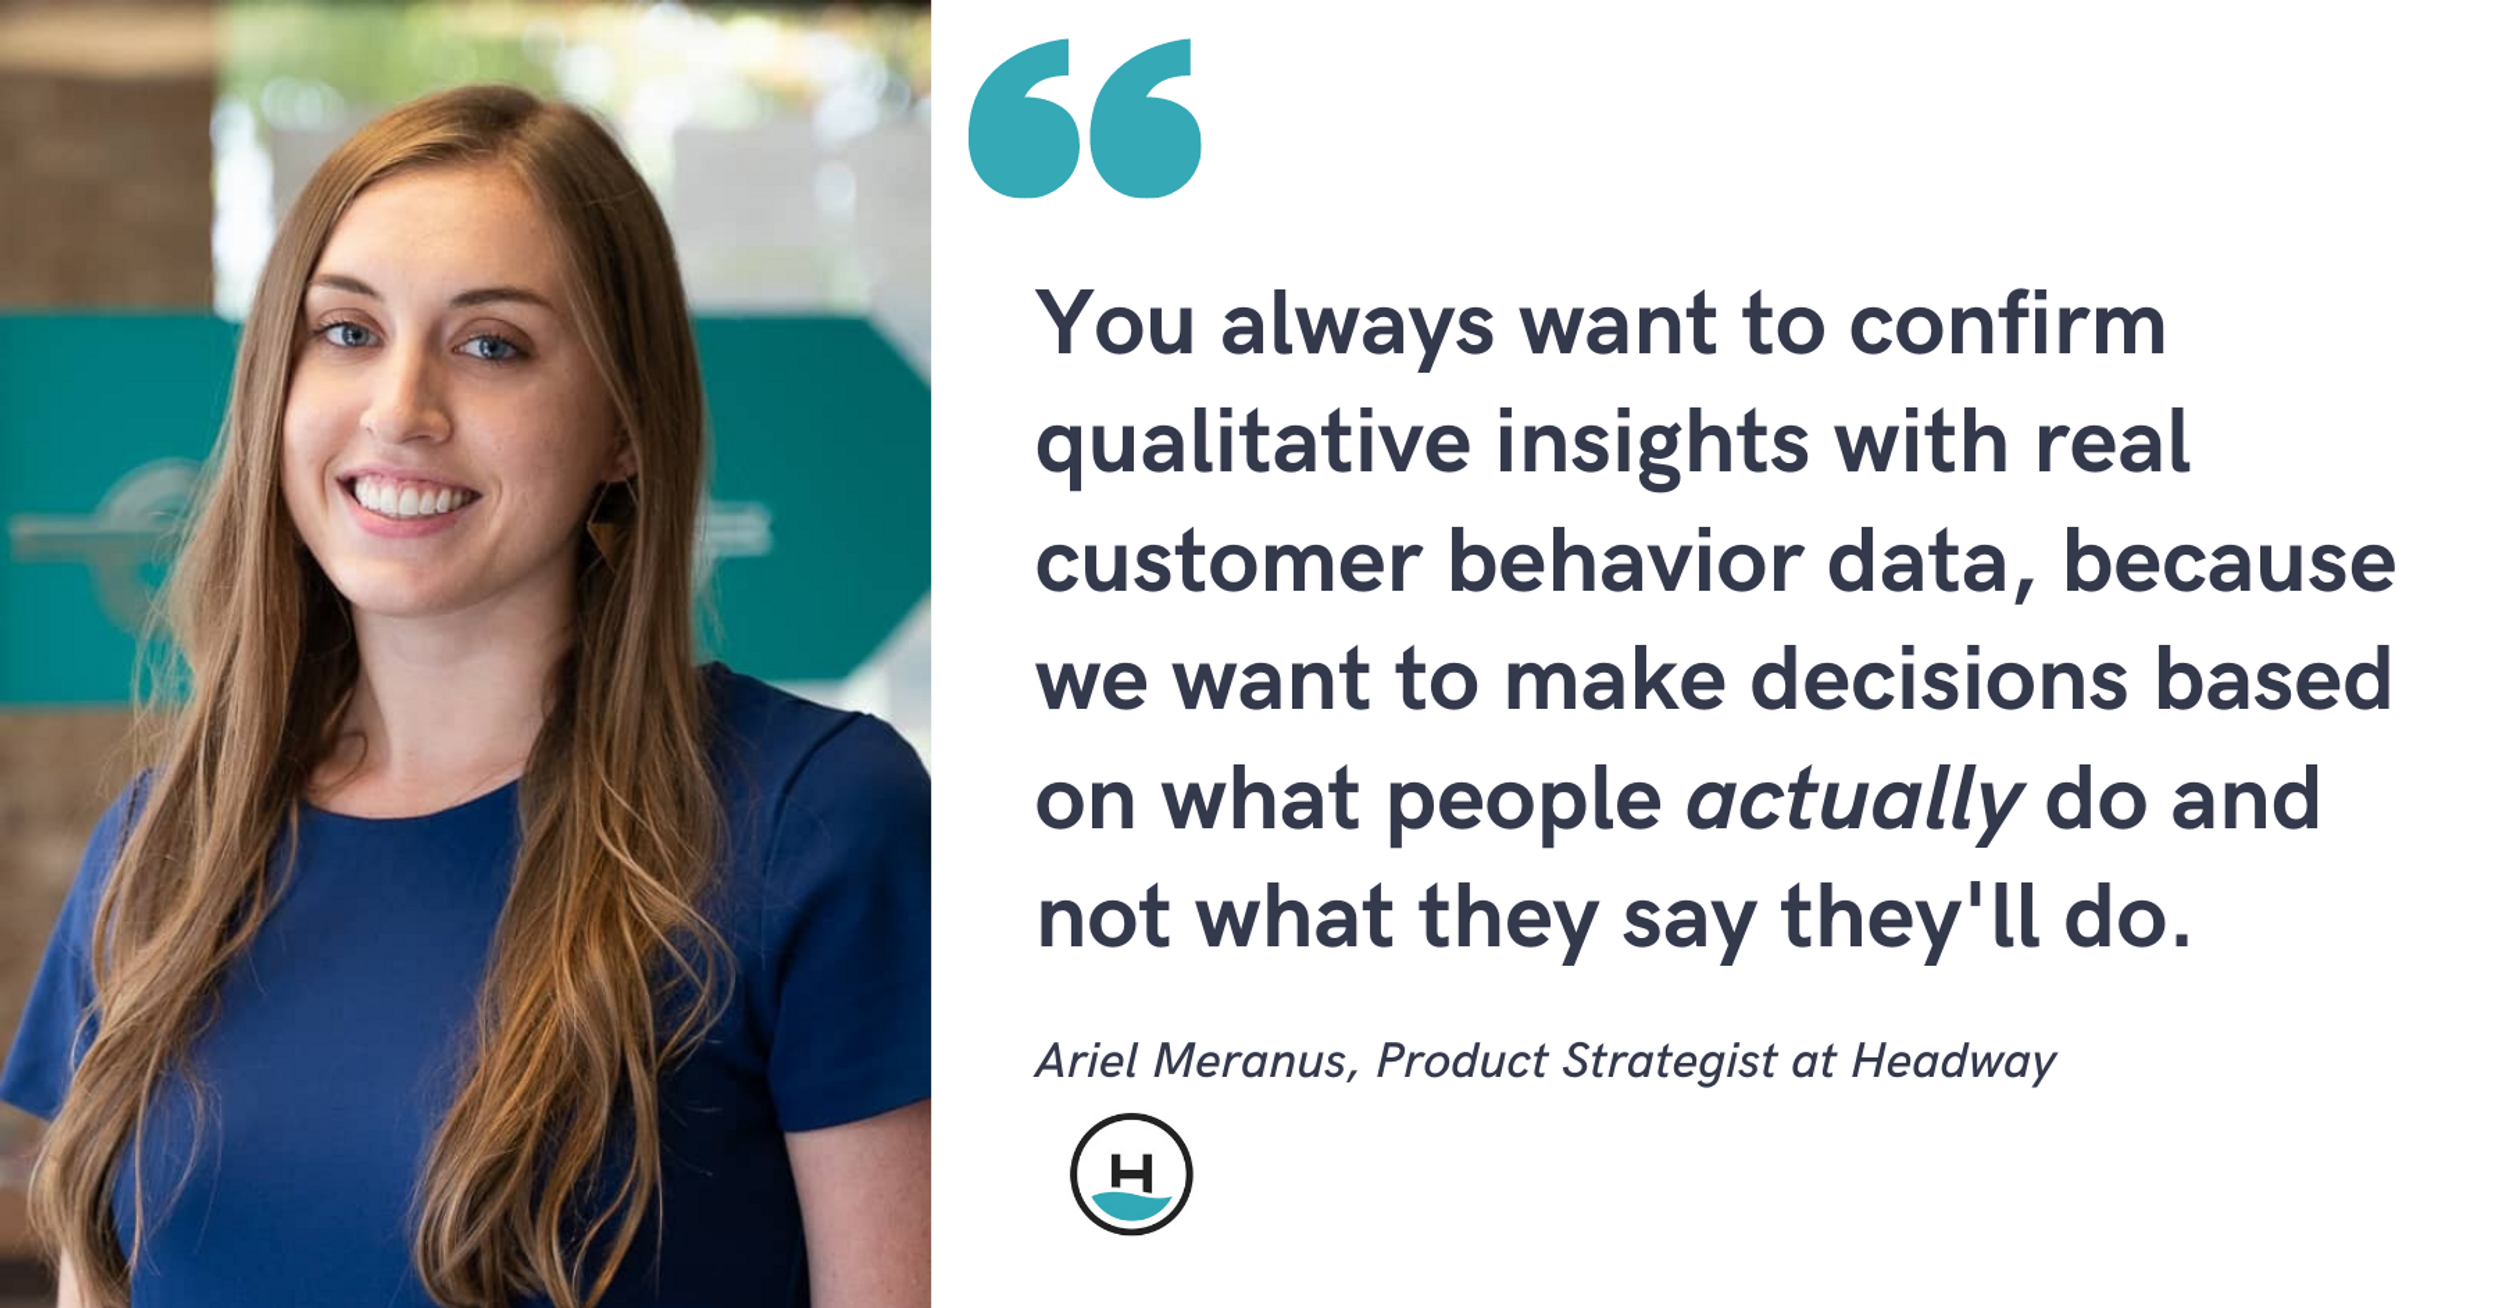 Blog post header with quote from Ariel Meranus, Product Strategist at Headway